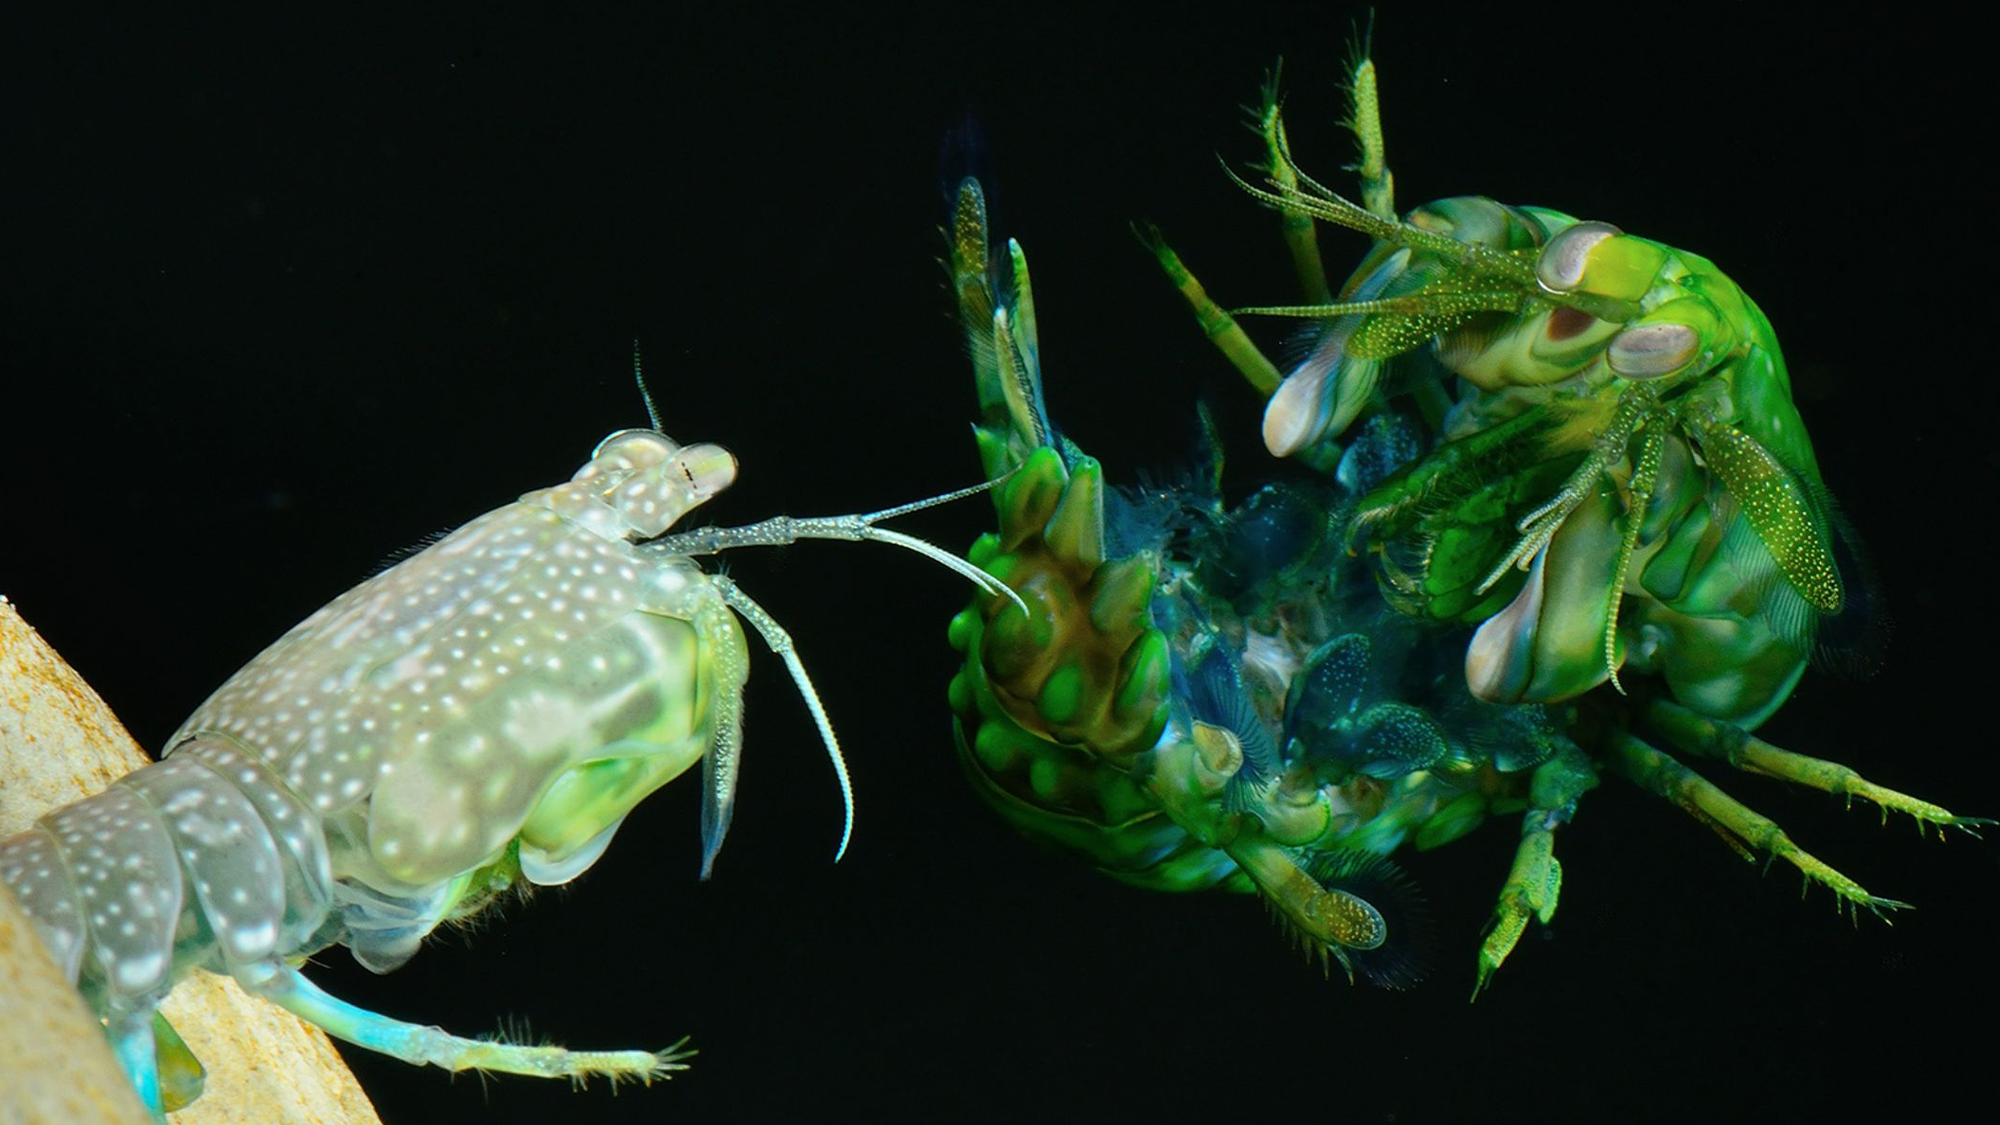 Bullet-fast mantis shrimp punches caught by super-speed cameras